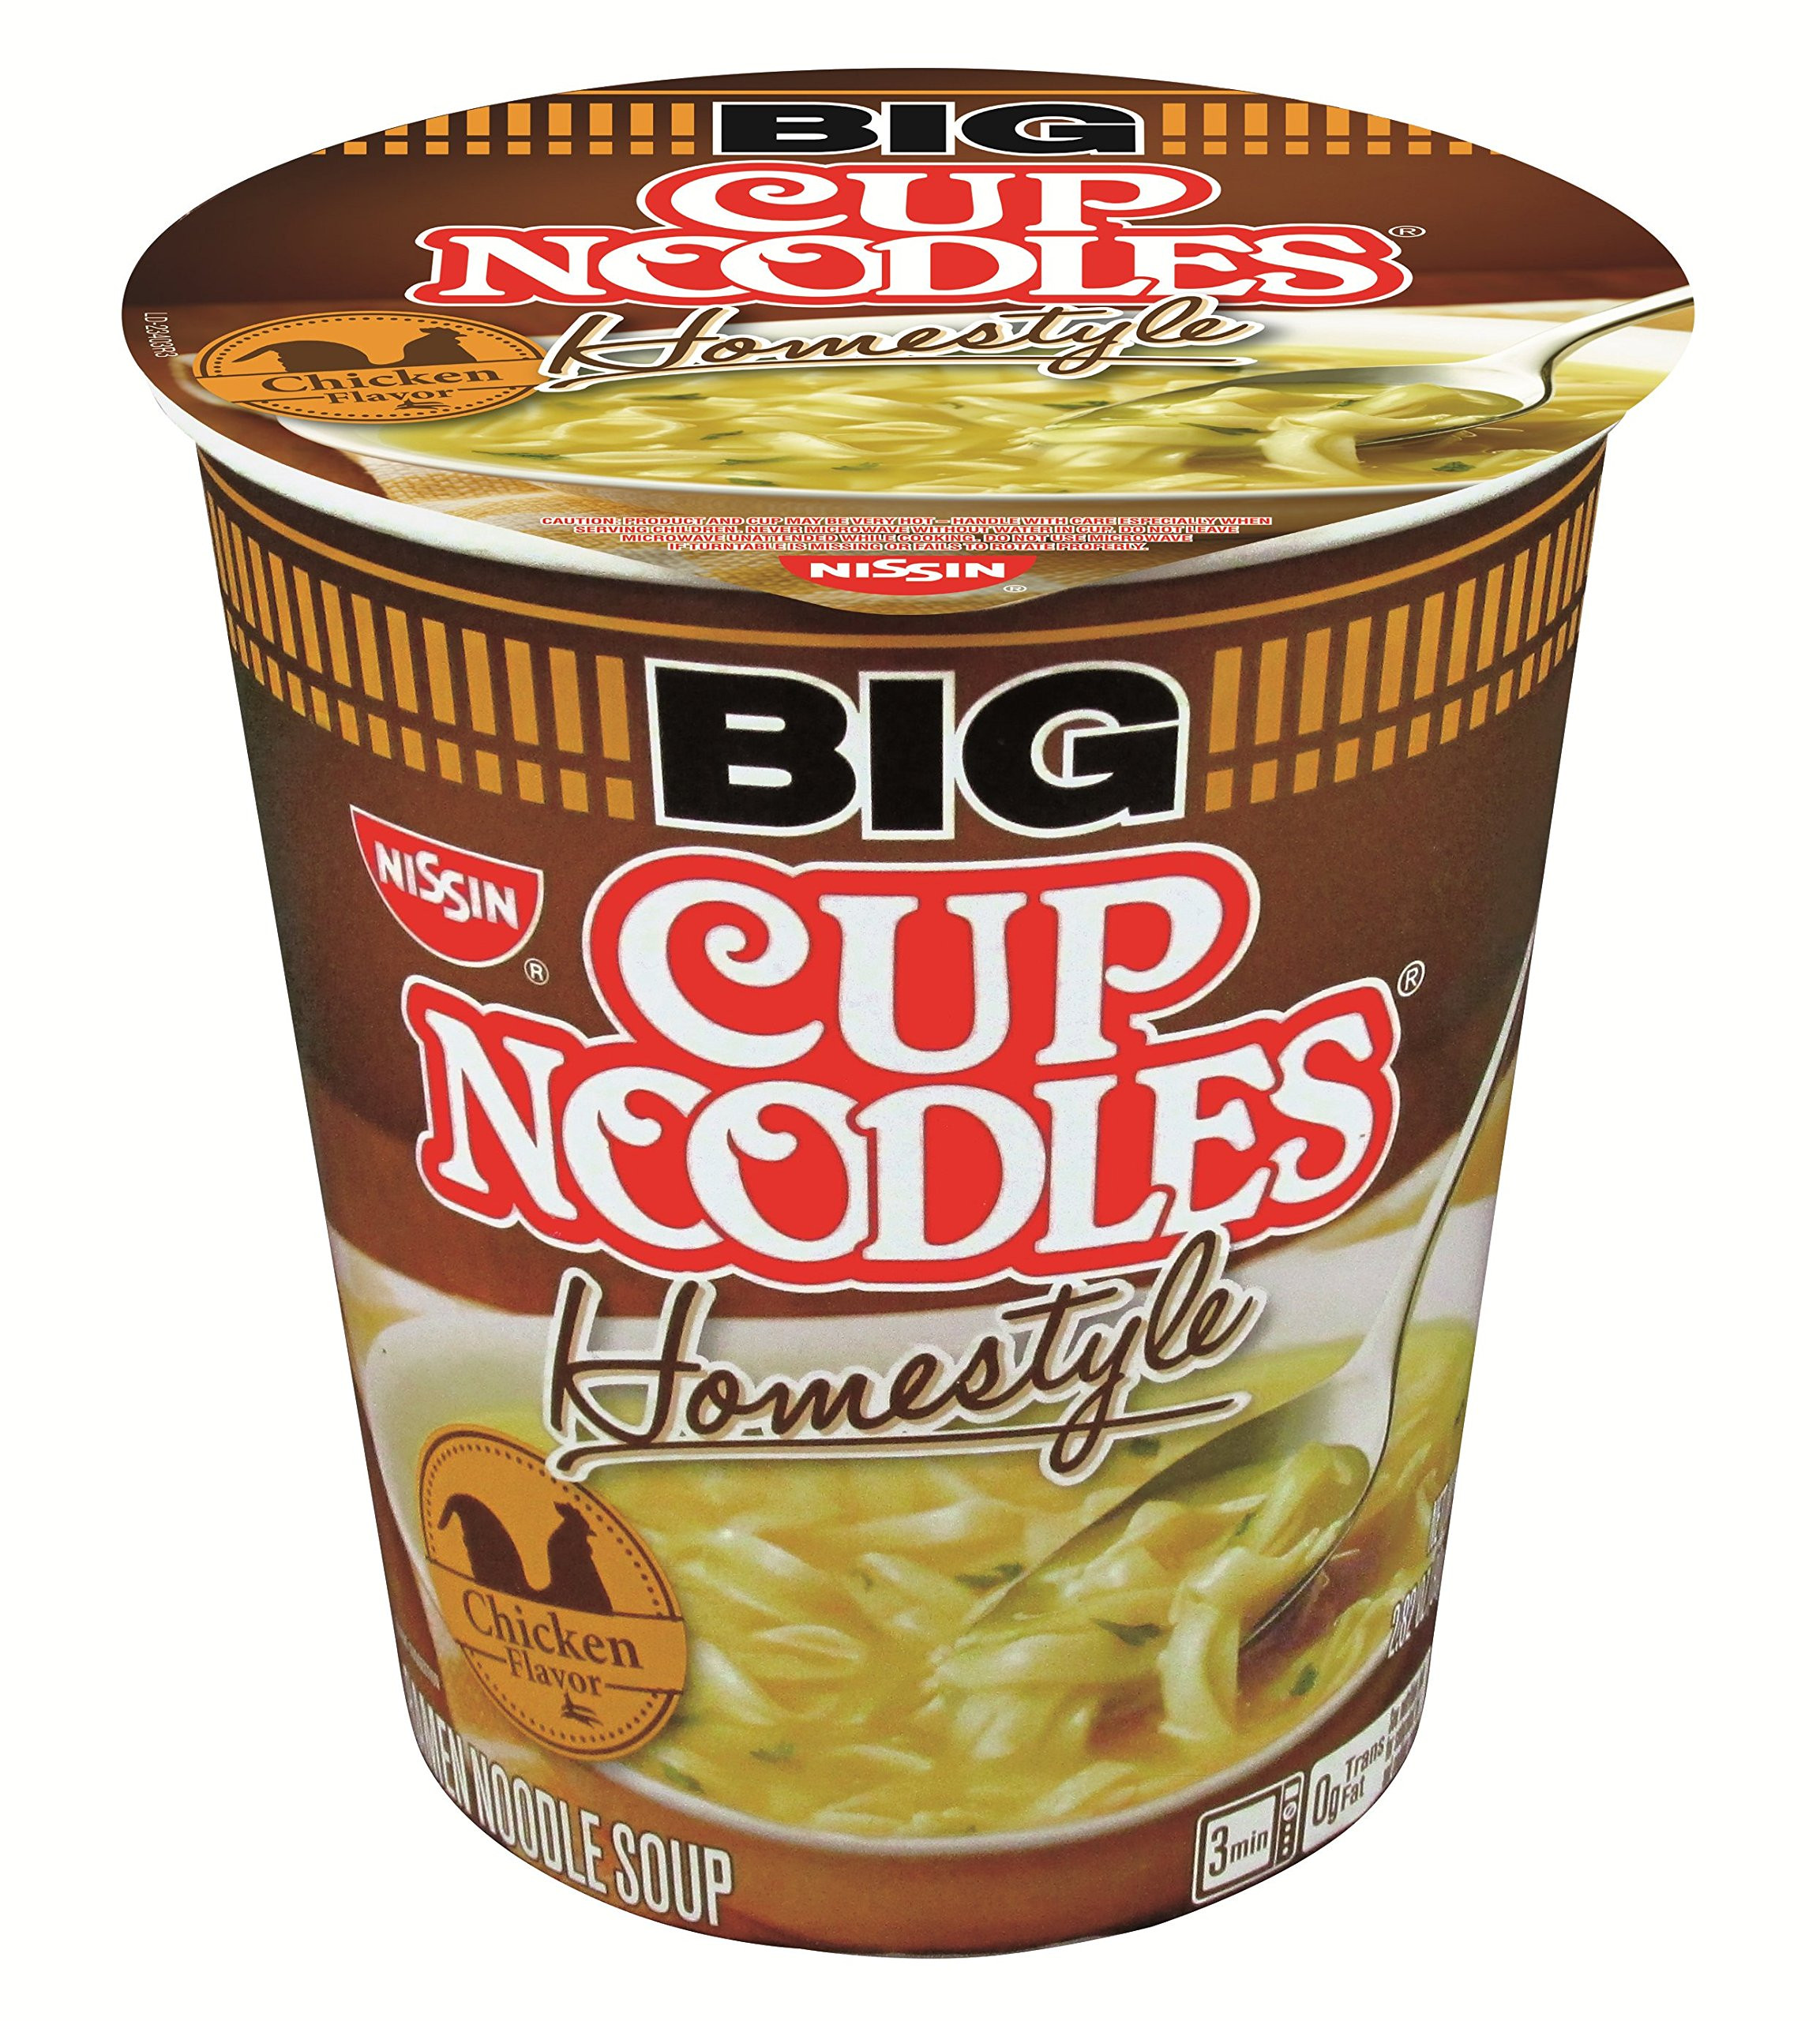 Cup Noodles Homestyle
 Amazon Big Cup Noodles Homestyle Chicken 2 82 Ounce